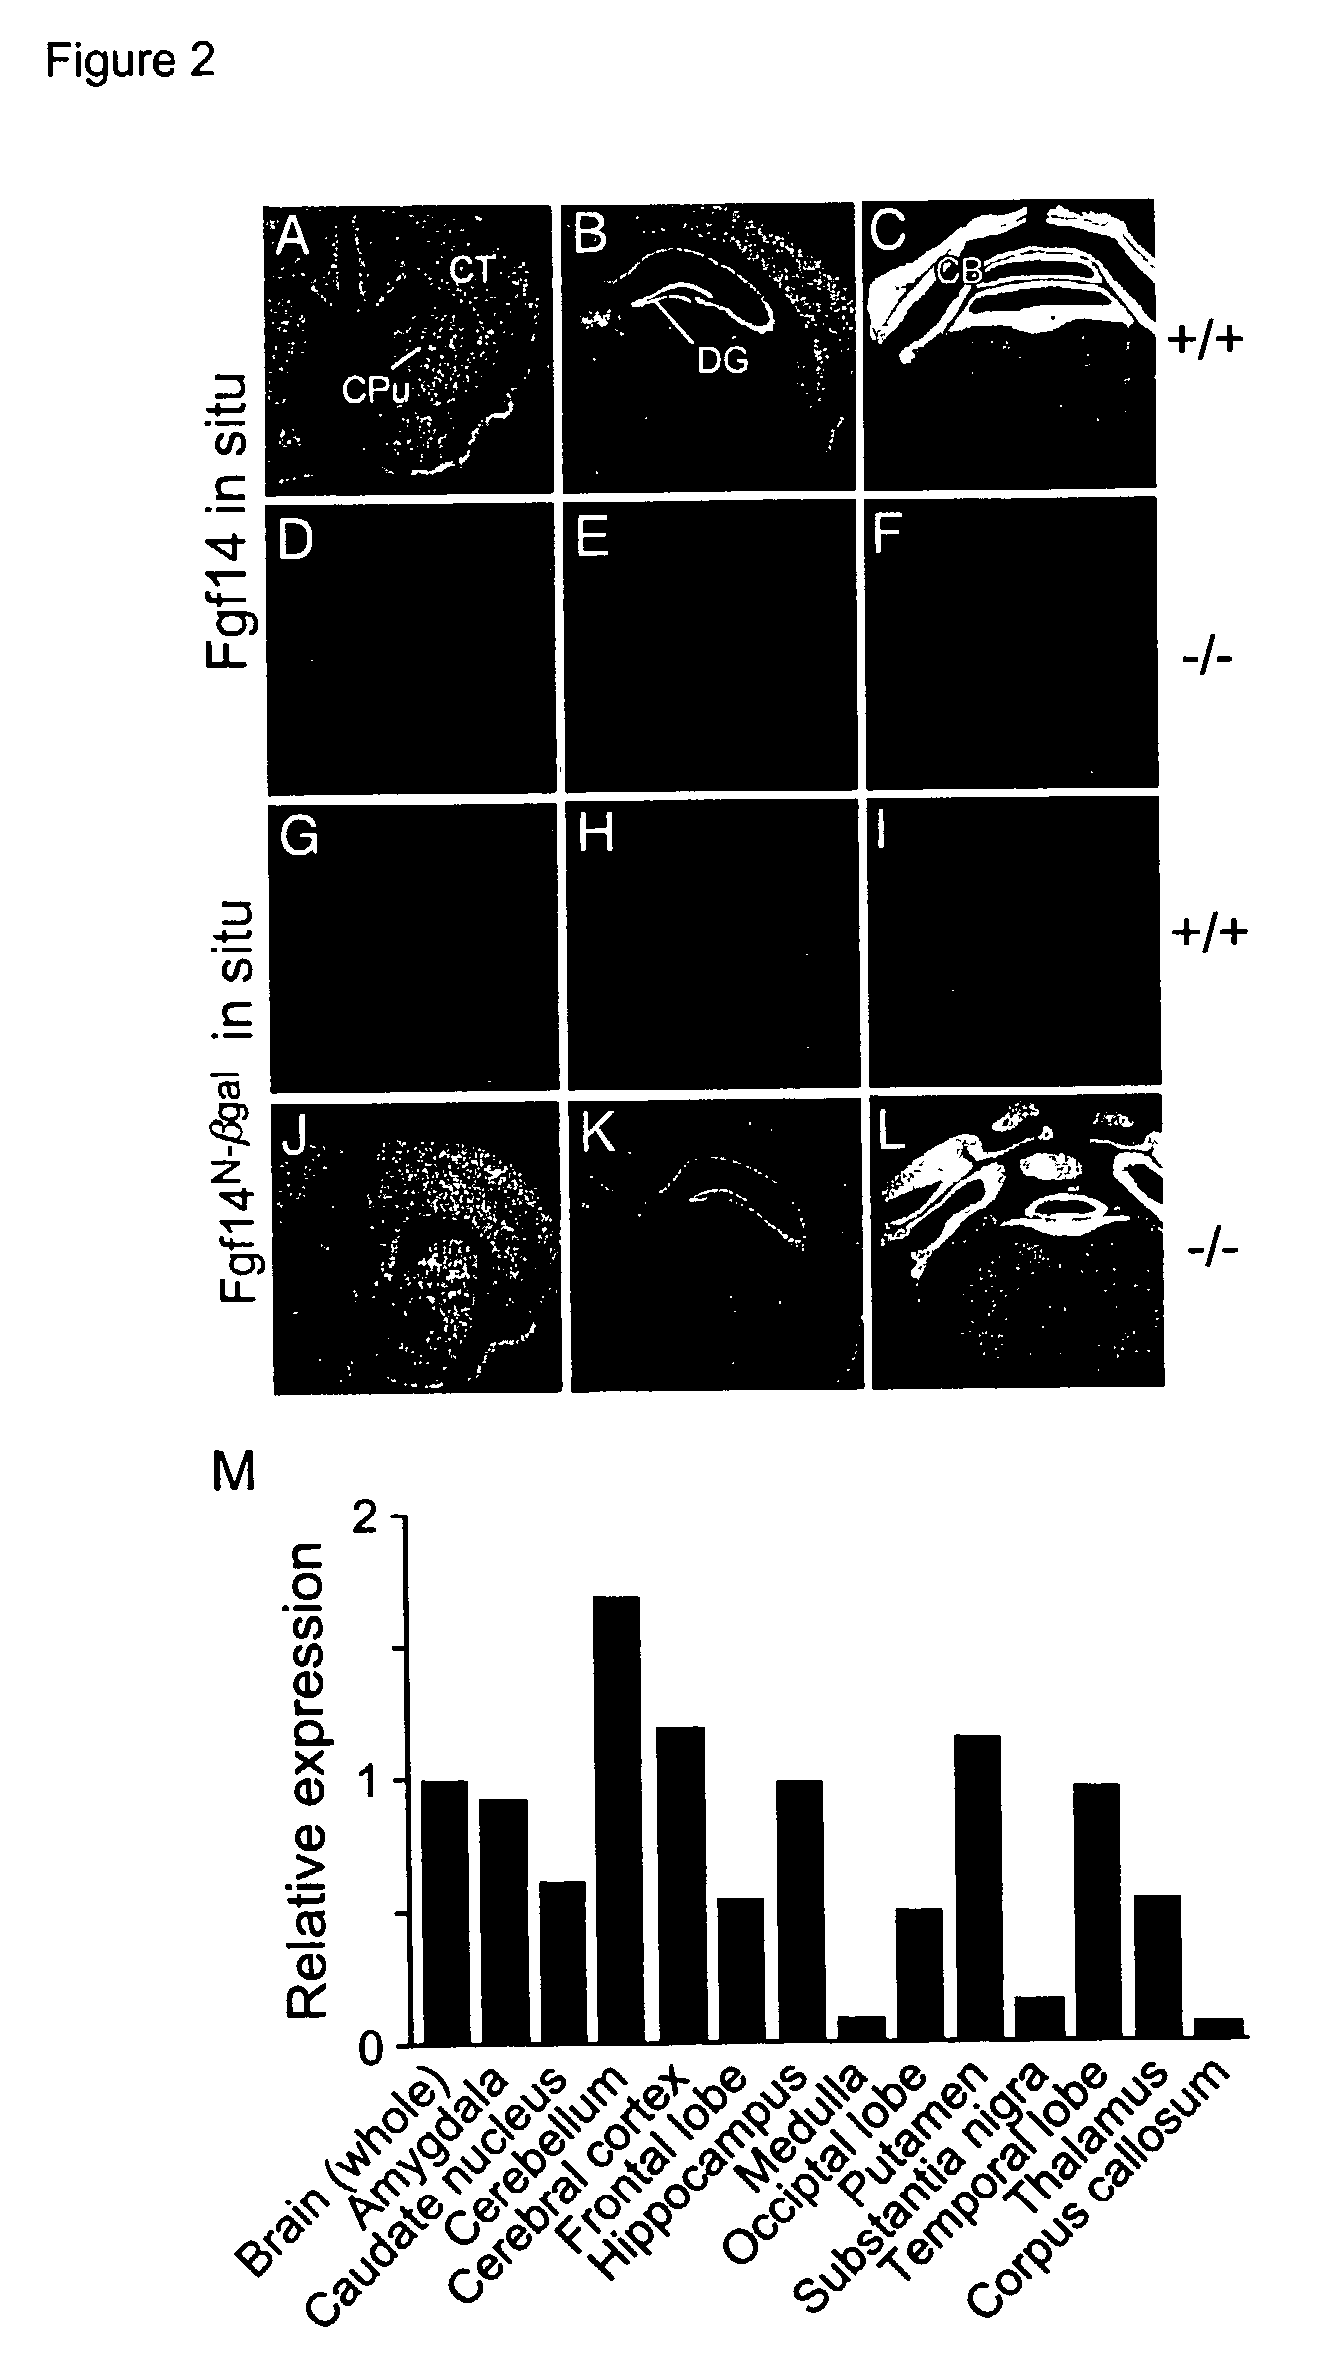 Animal model with disrupted Fgf14 gene